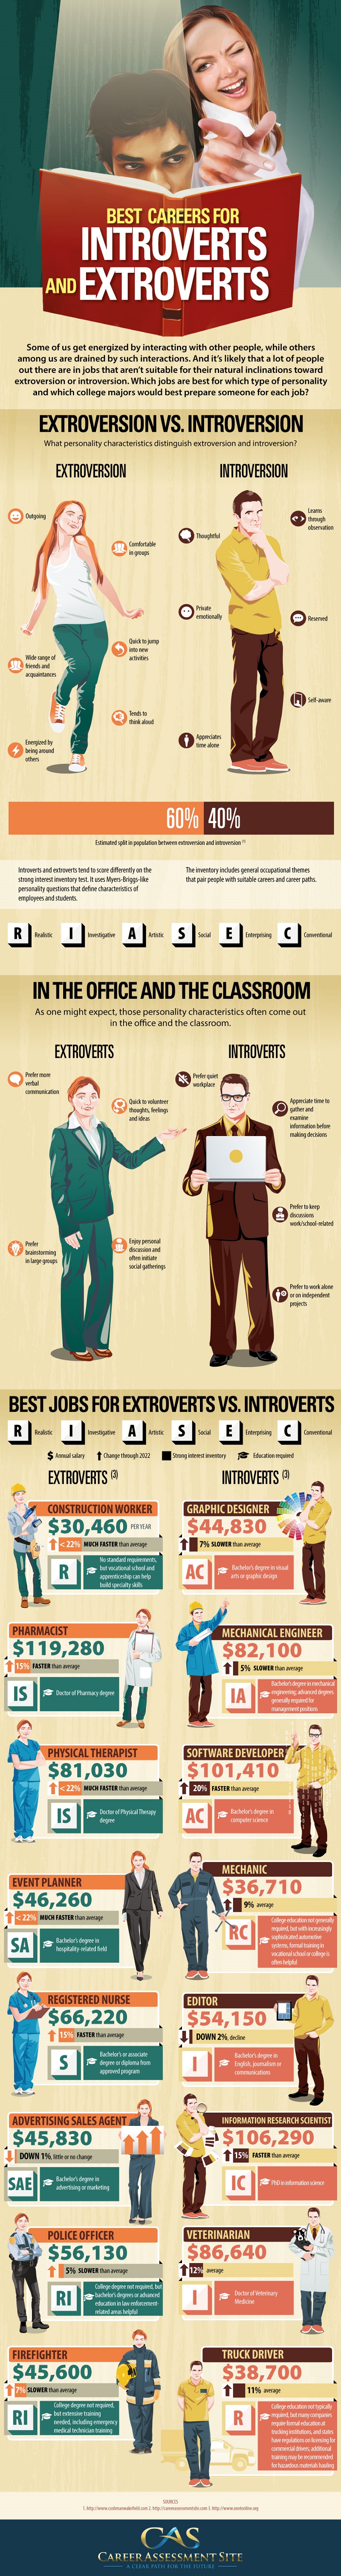 Career-Infographic